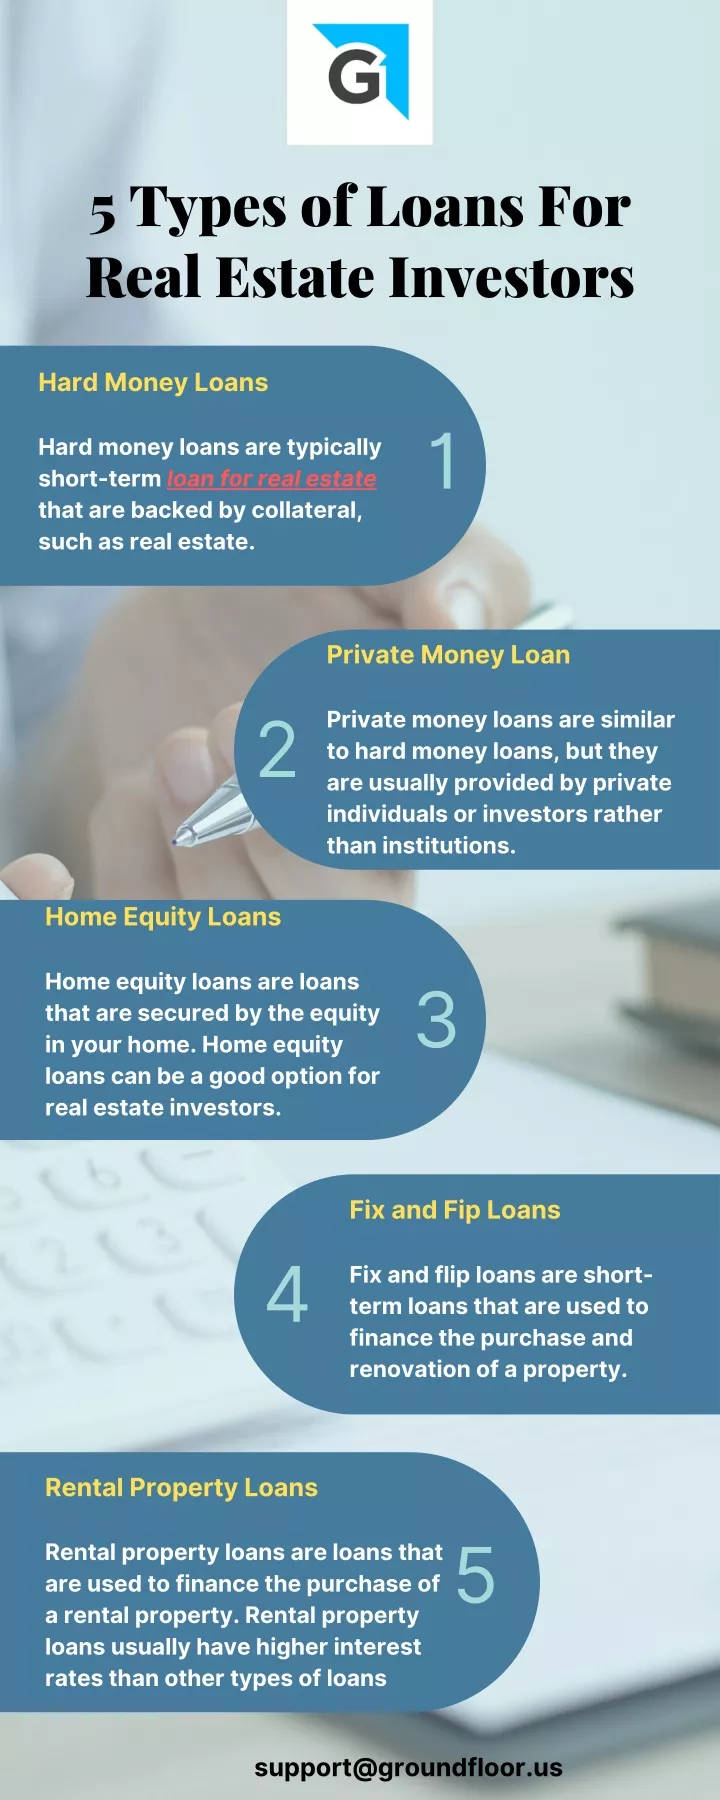 5 types of loans for real estate investors